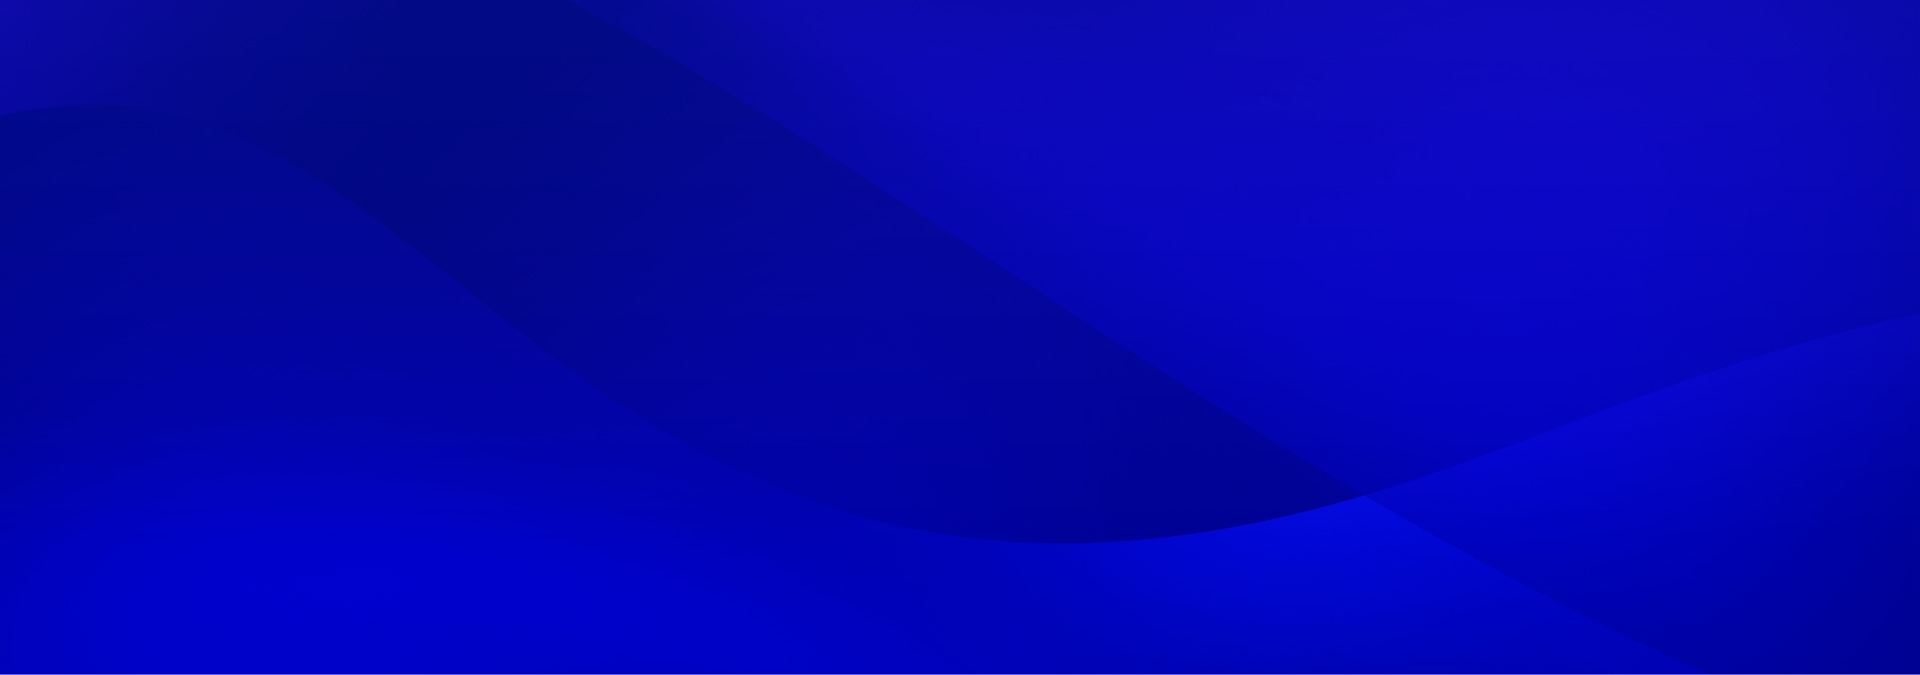 Dynamo Banner Abstract Background